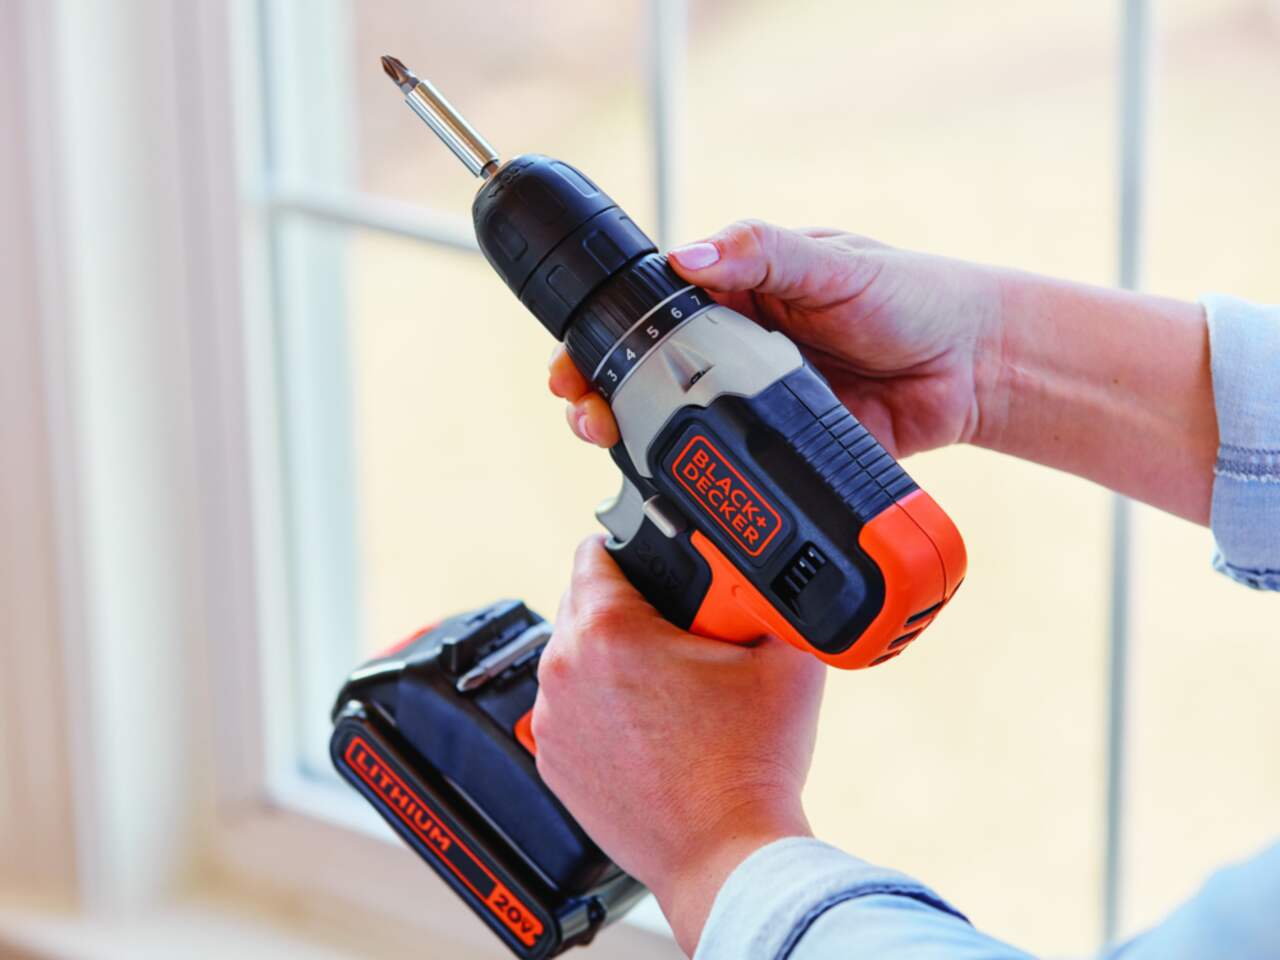 https://media-www.canadiantire.ca/product/fixing/tools/portable-power-tools/3994924/black-and-decker-20v-max-cordless-drill-driver-9ef4f099-0eb0-447a-b6f2-c53c0d023eed.png?imdensity=1&imwidth=1244&impolicy=mZoom